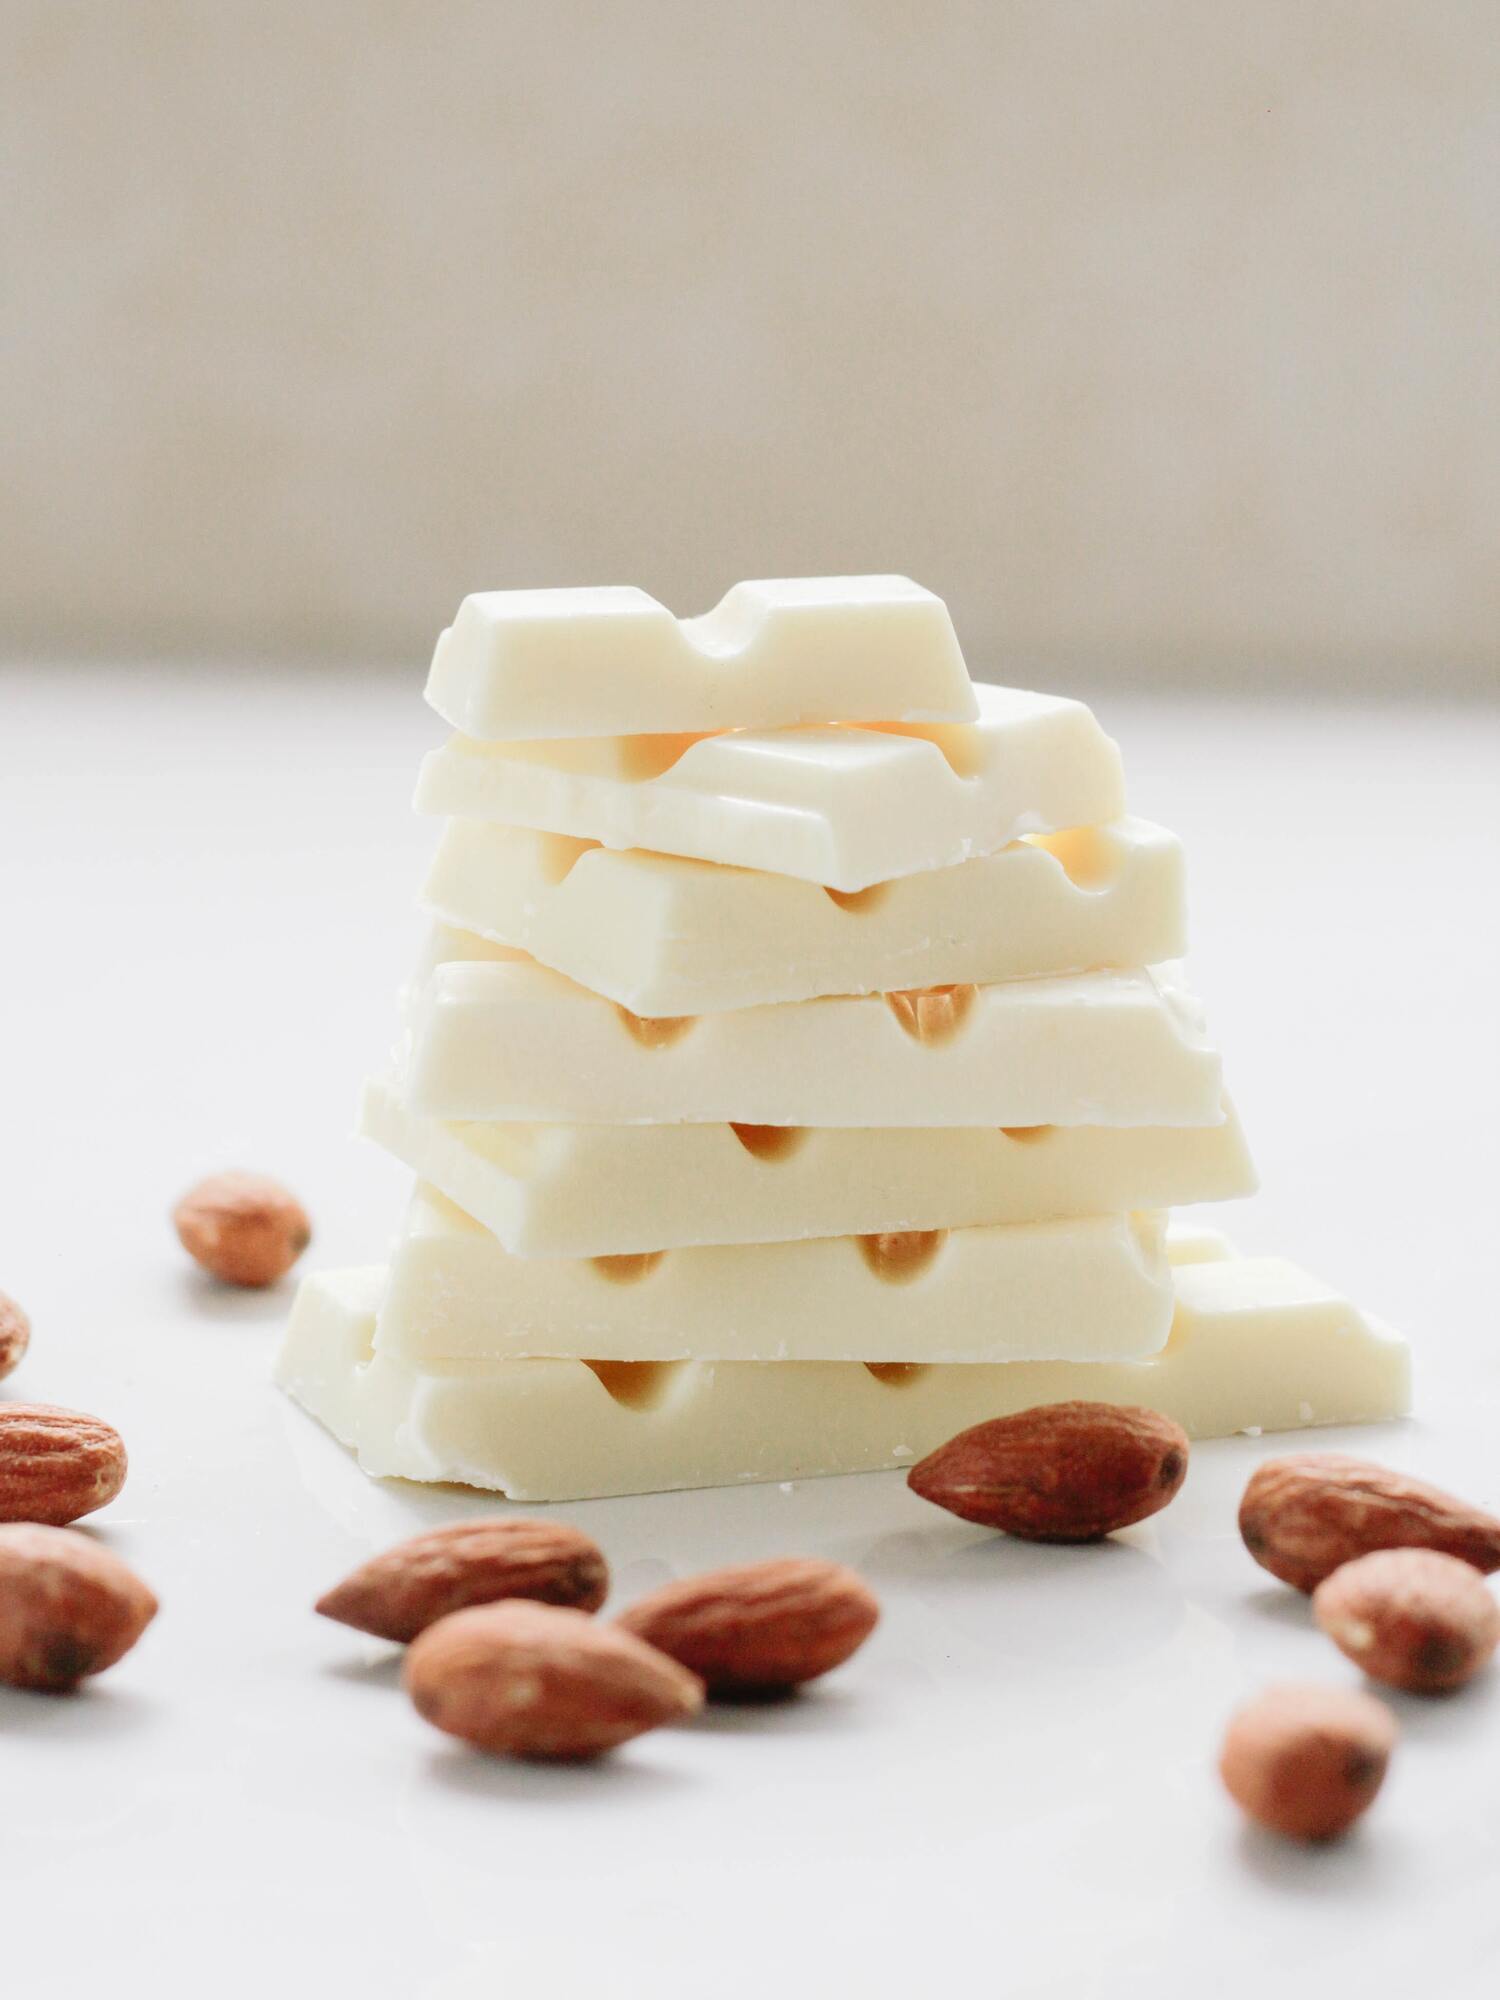 White chocolate for icing